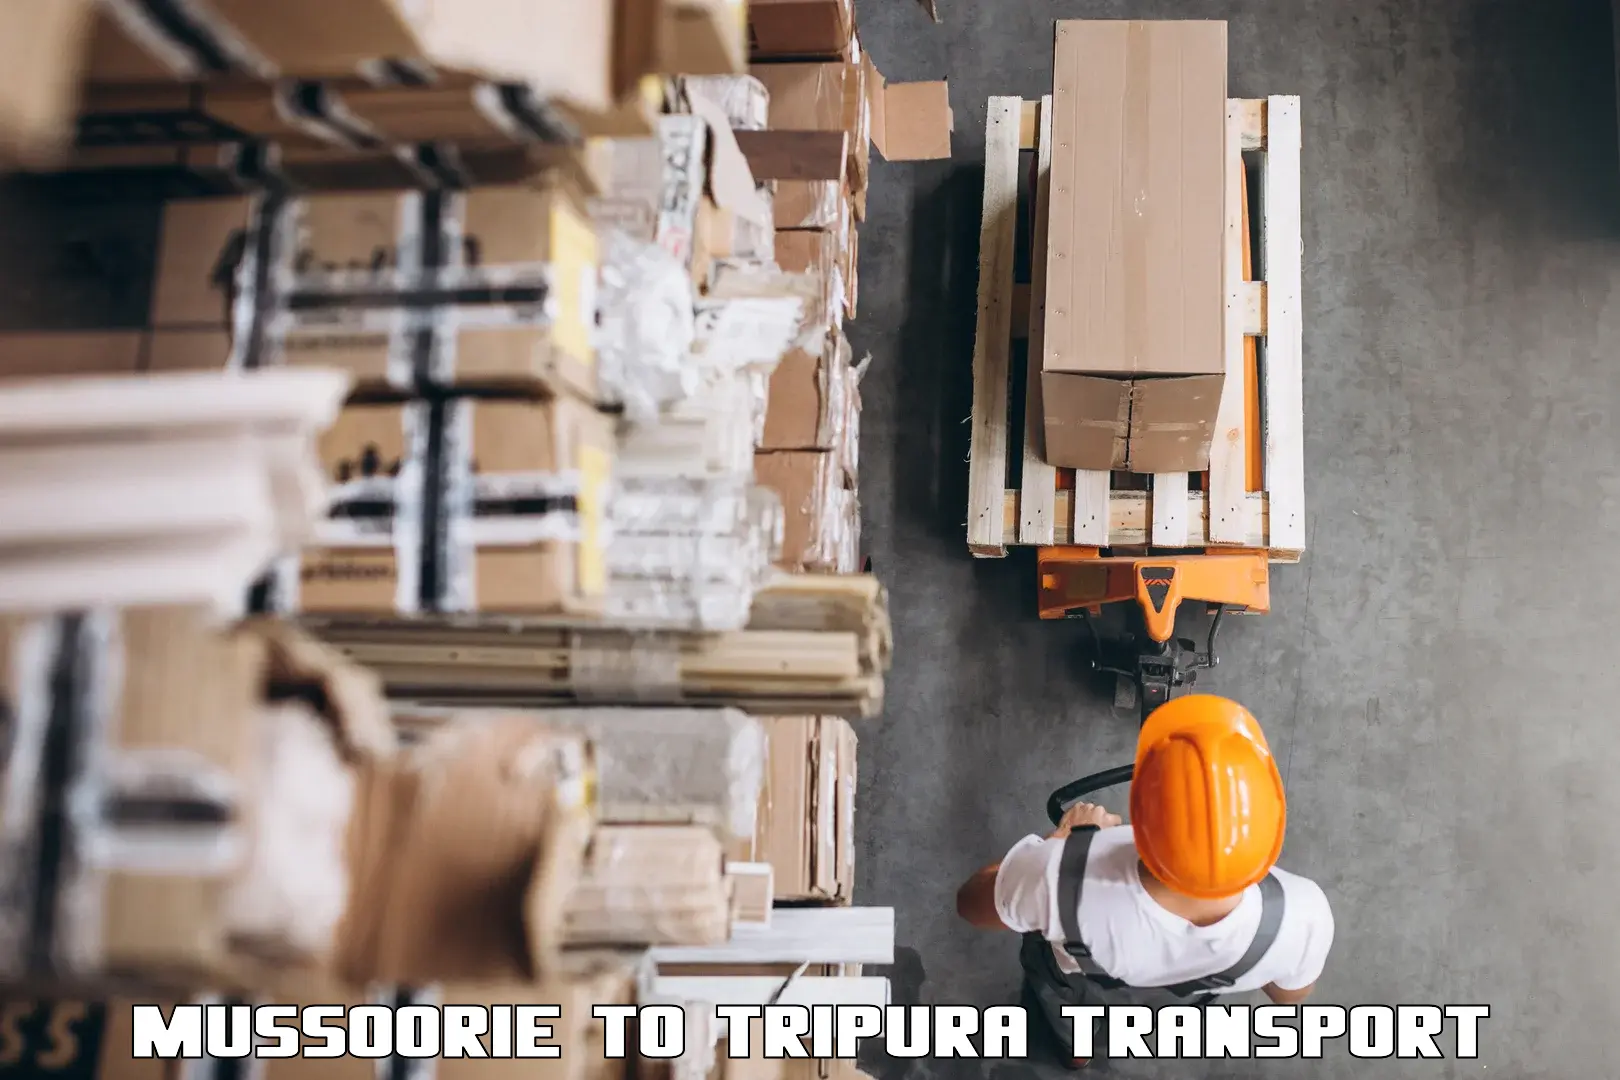 Container transport service Mussoorie to Udaipur Tripura